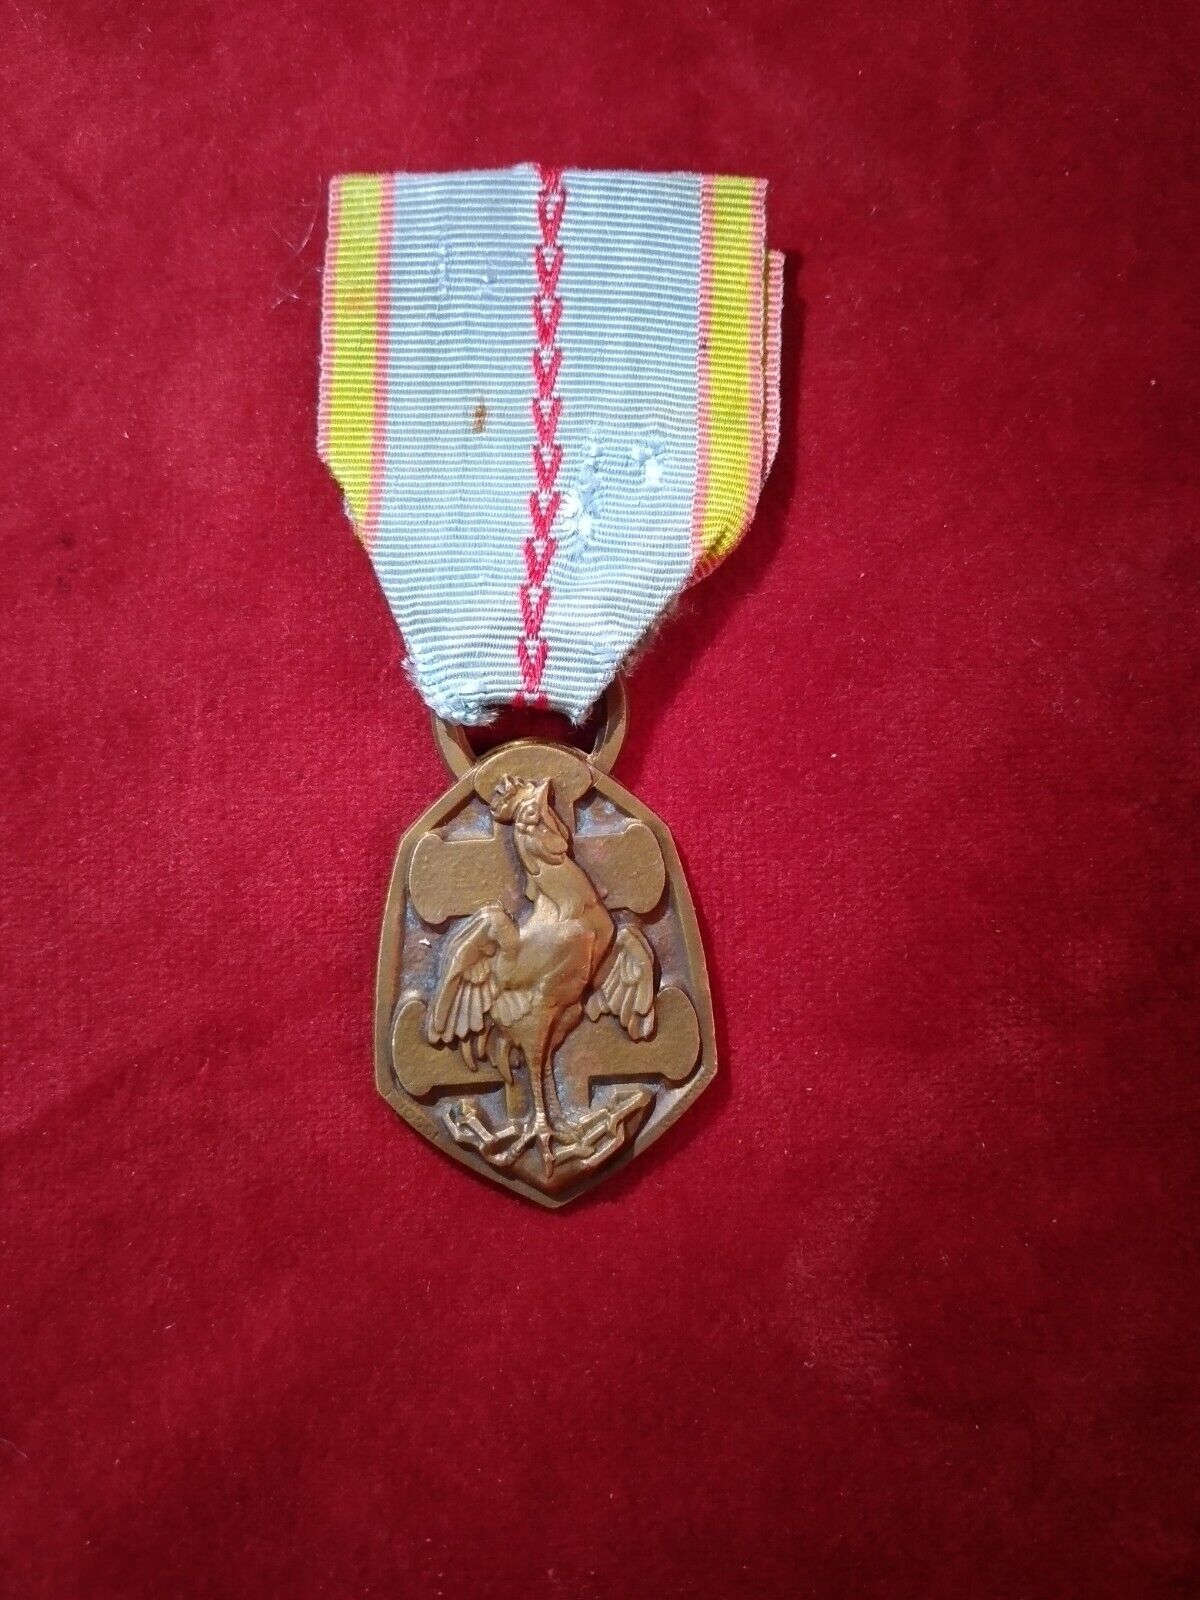 French Colonial Metal Medal Rooster Old Commemorative Medal WWII 1939-1945